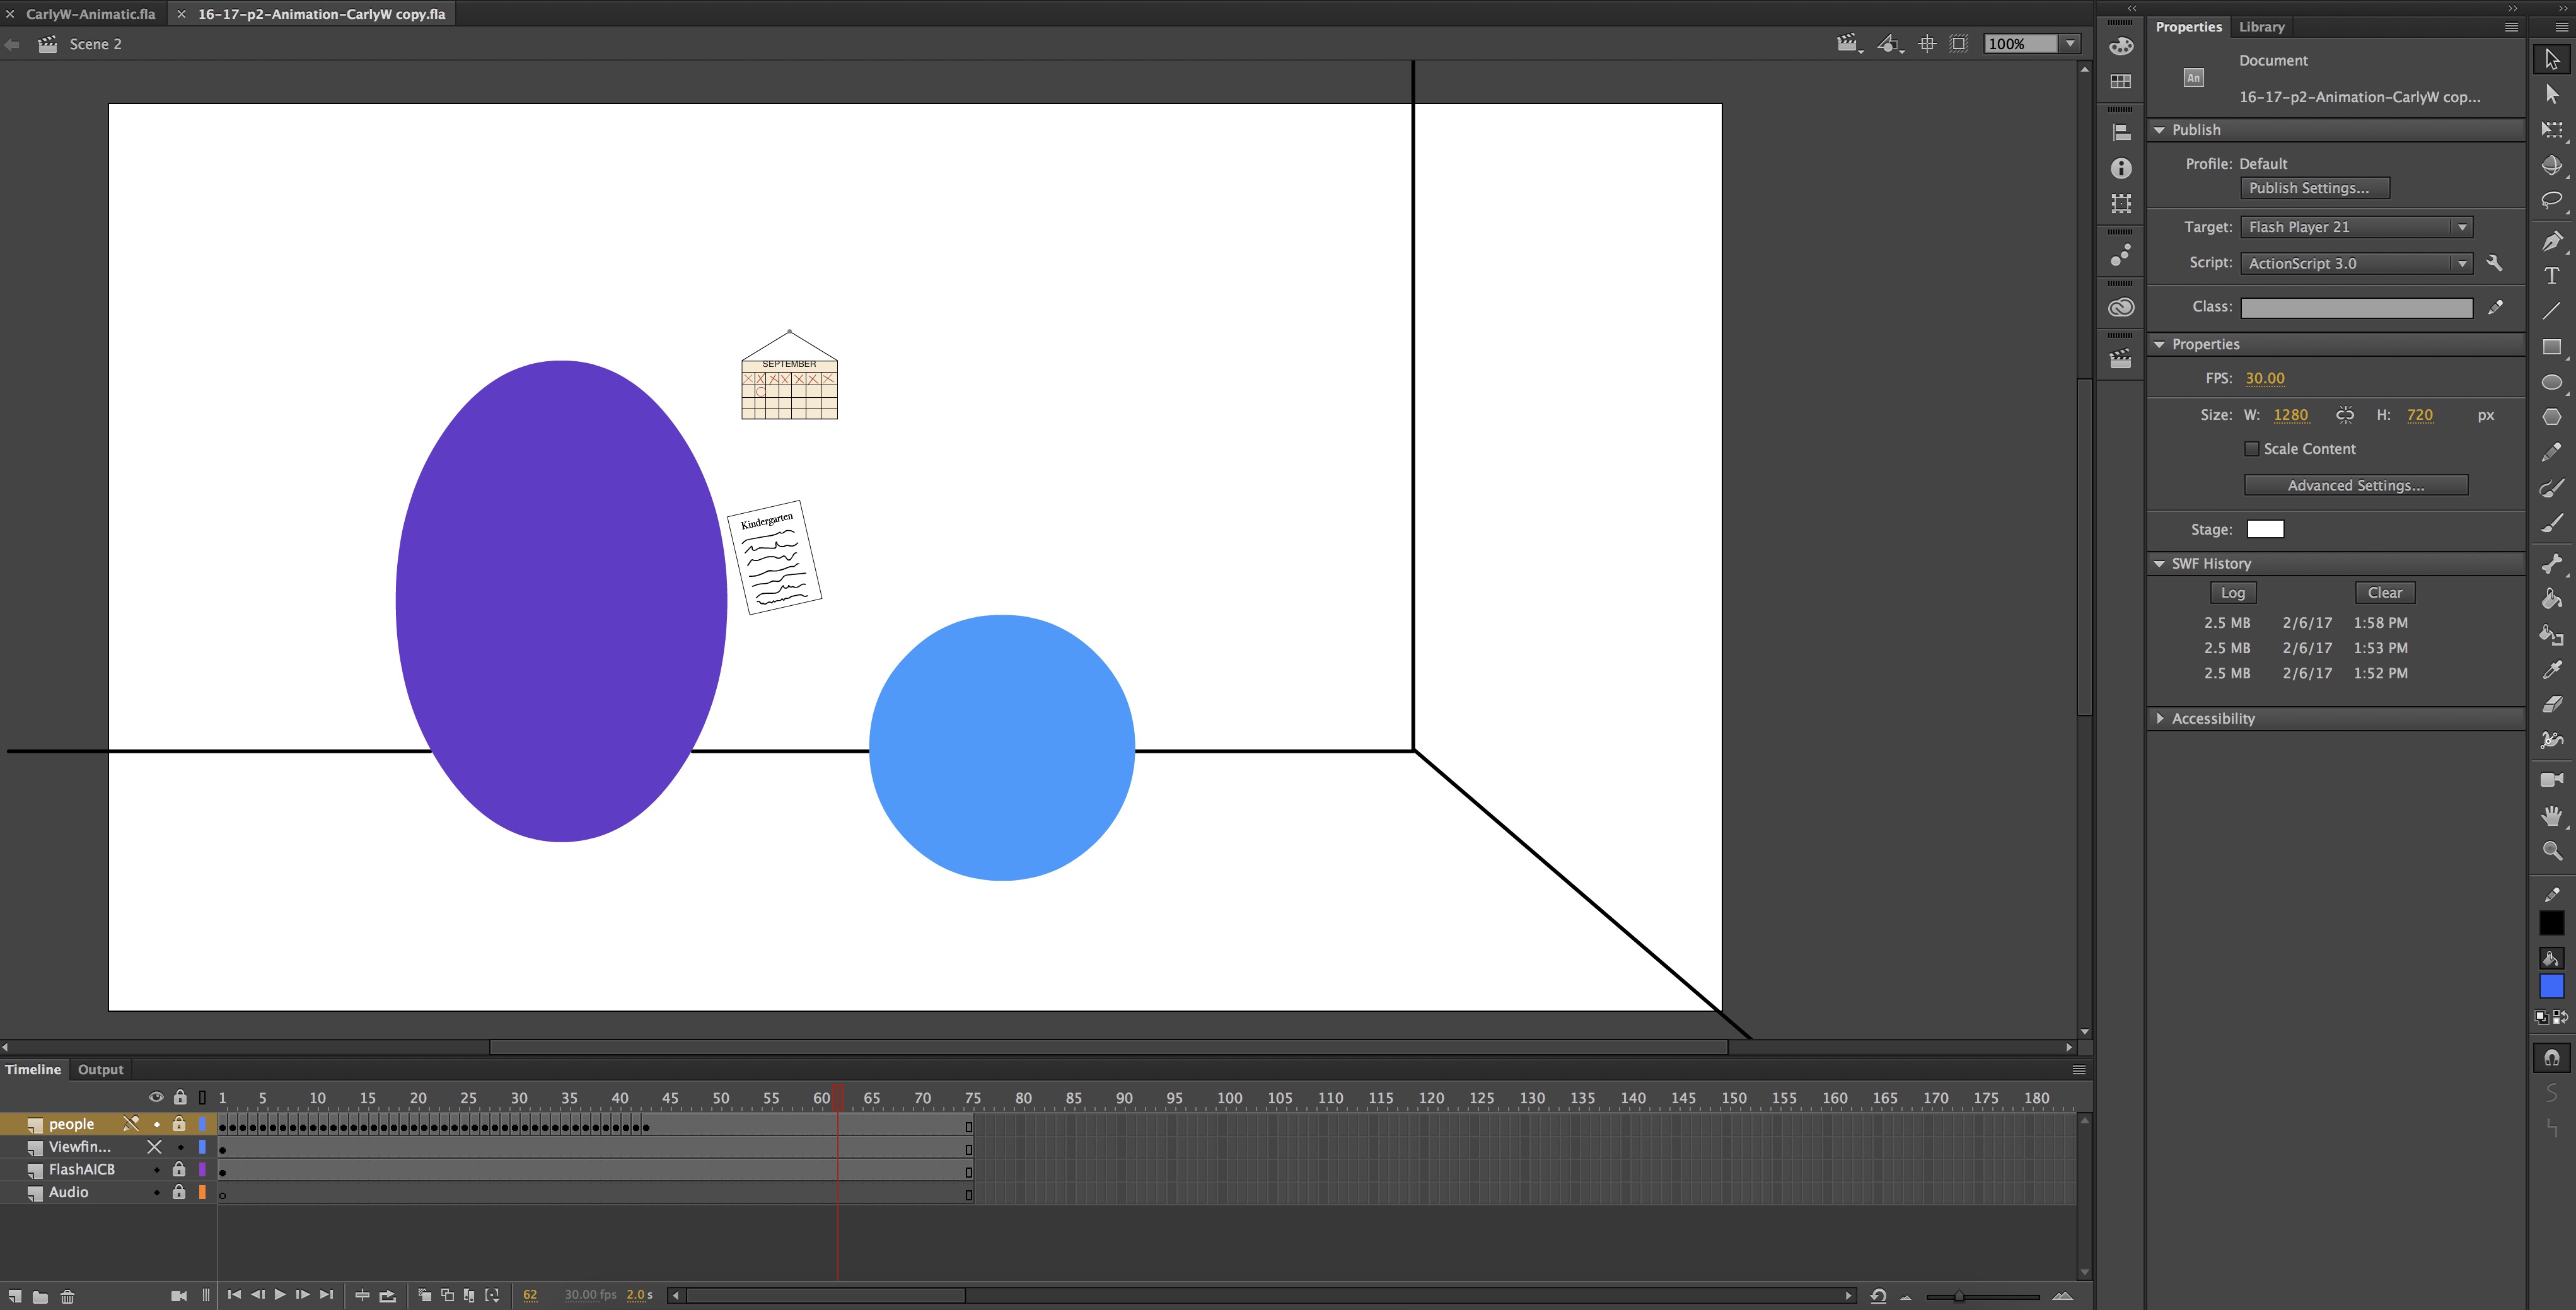 Screenshot of Animate session for my animation